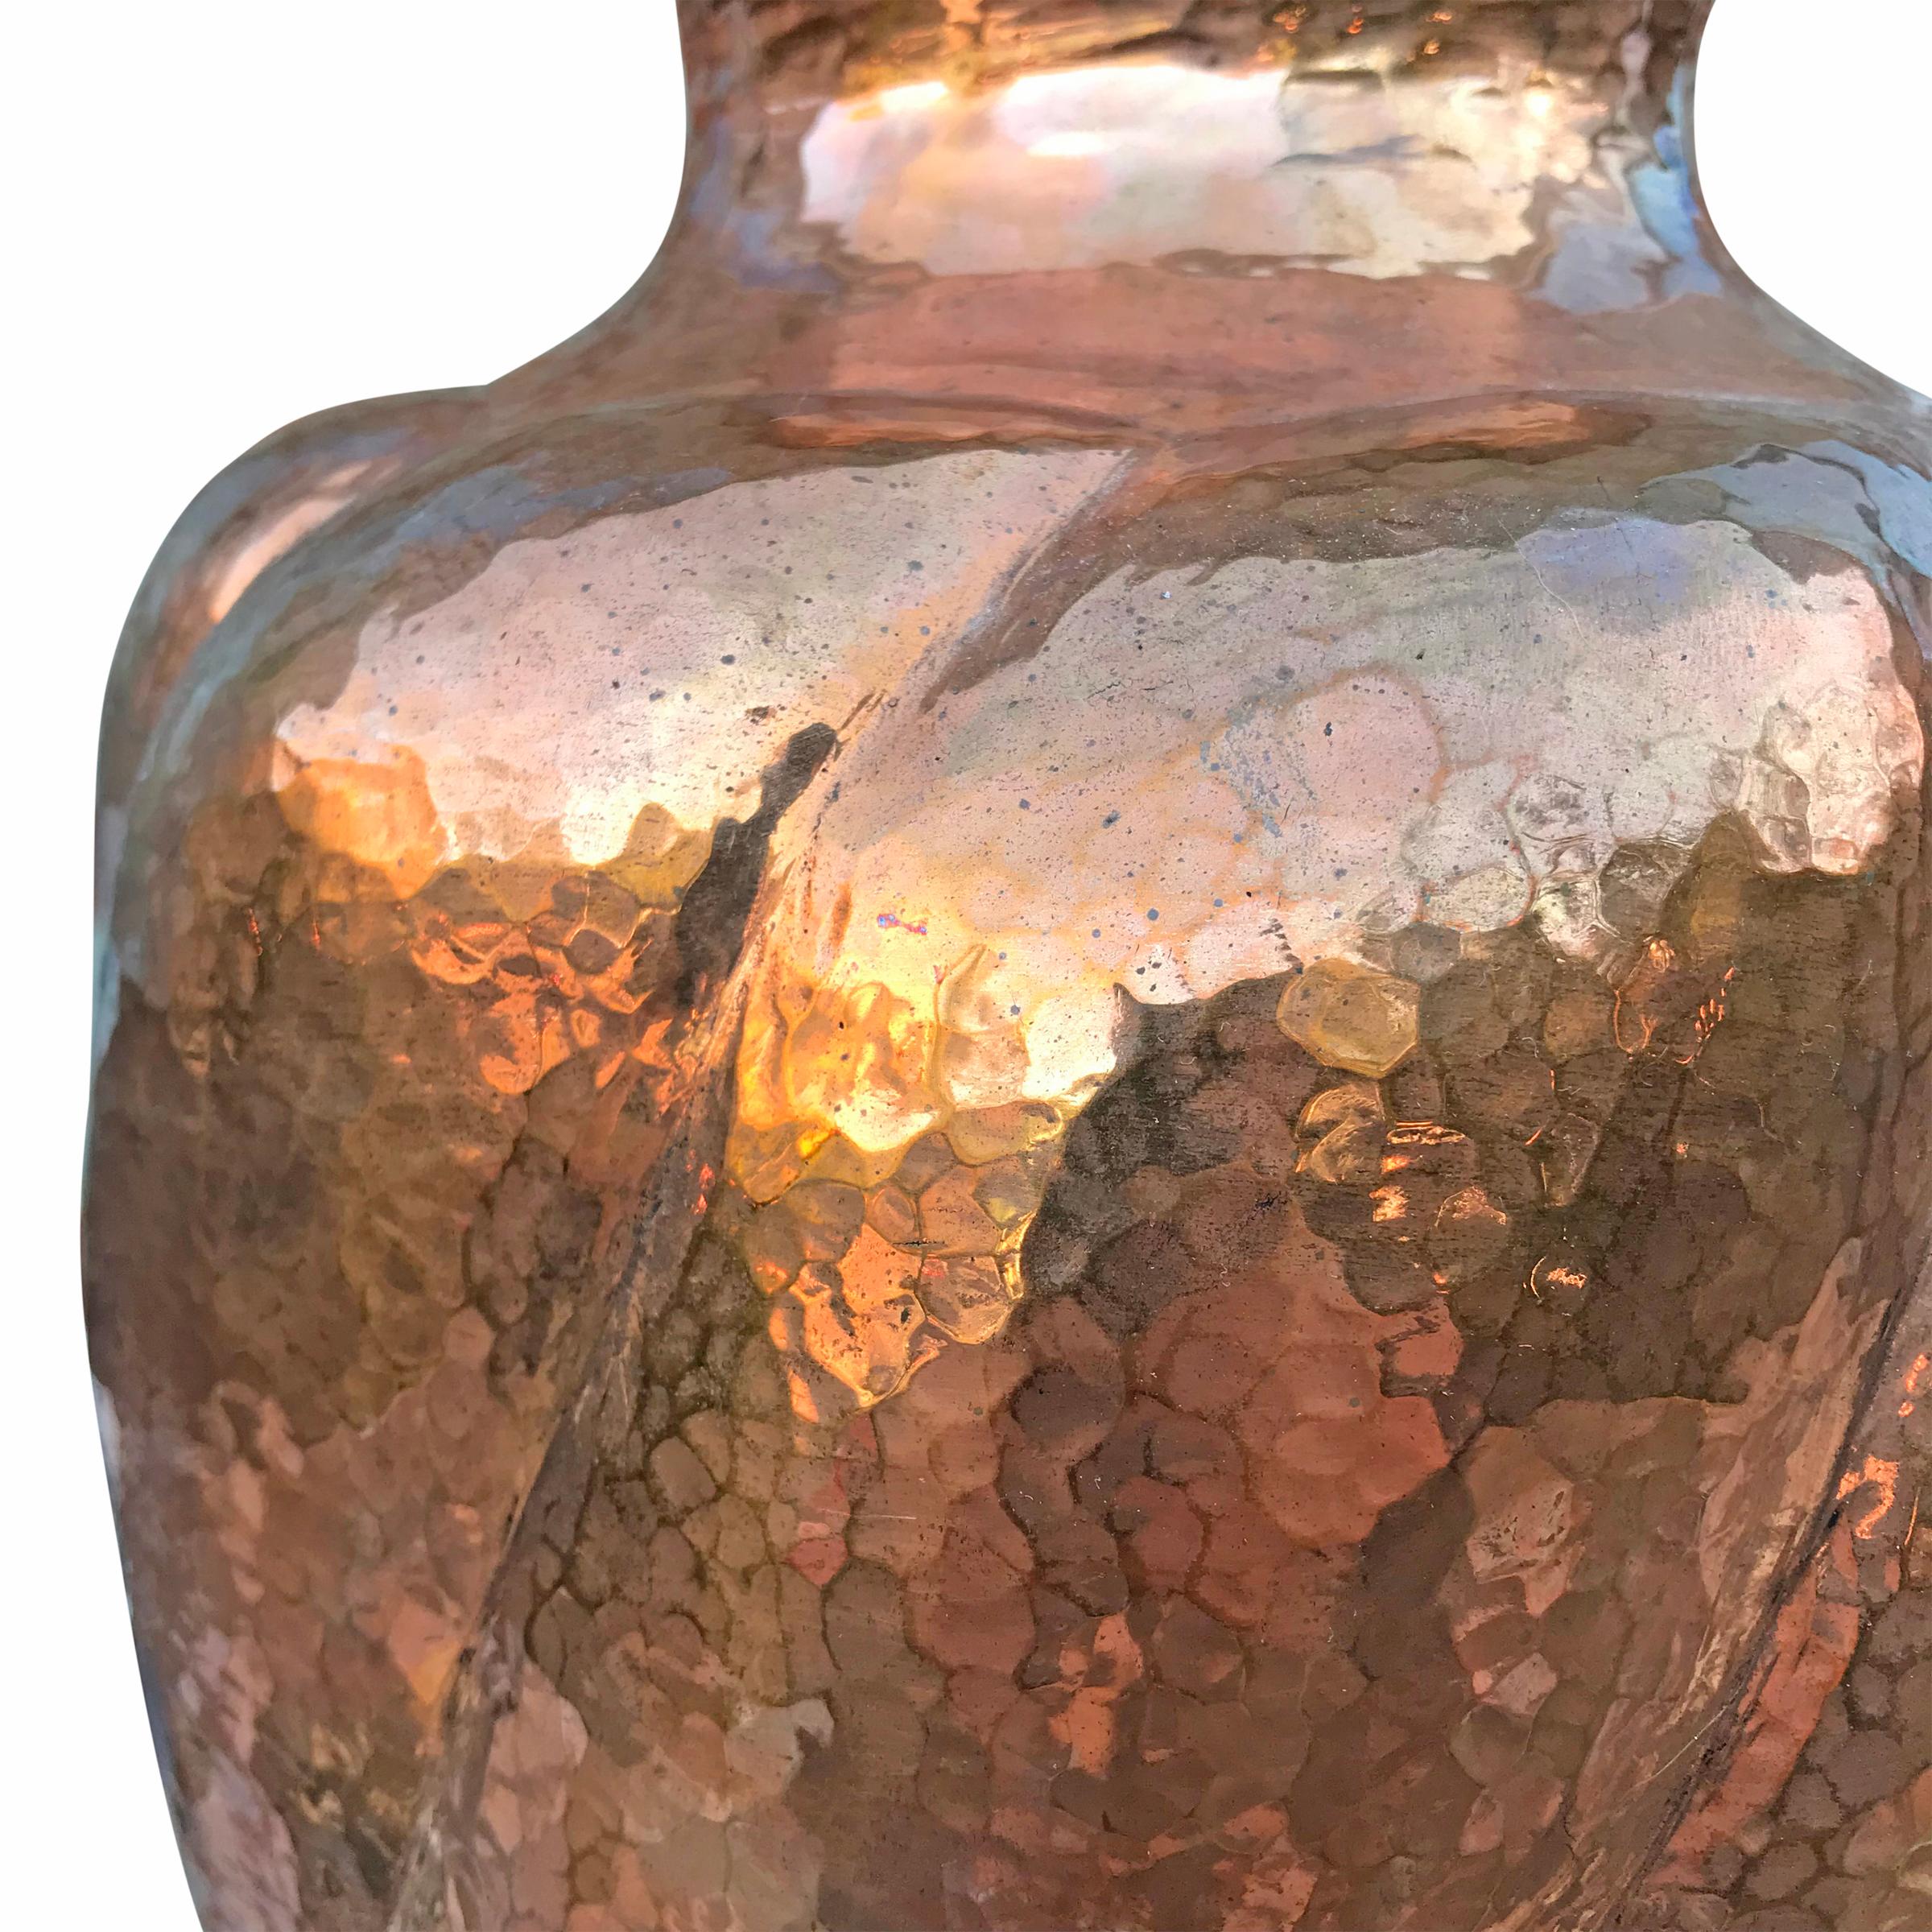 A beautiful Mexican hand-hammered copper vase with a swirled pattern, and a wonderful patina. The thickness of the copper on this vase makes it a wonderfully heavy and beautiful object.